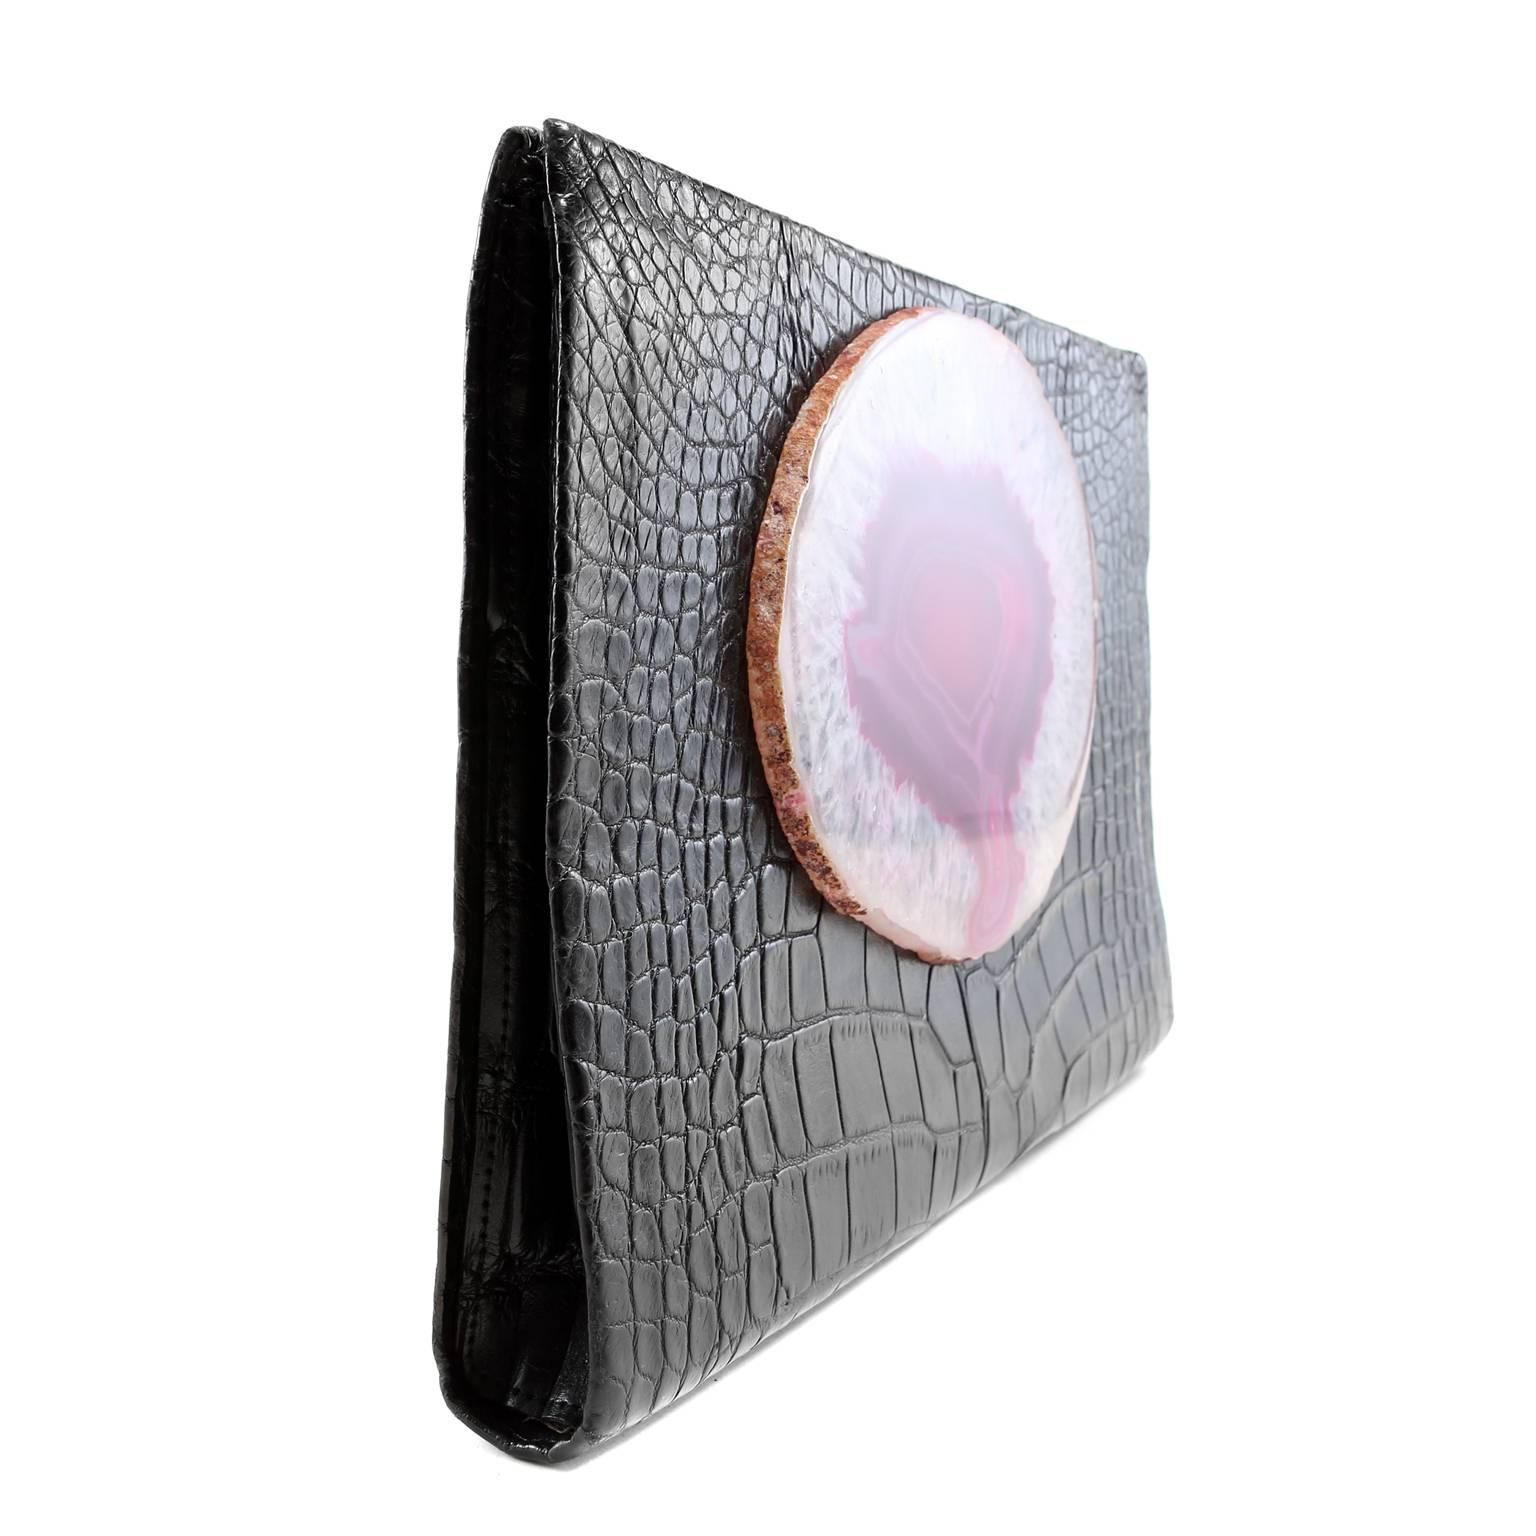 Paige Gamble Black Alligator Clutch- PRISTINE
Totally unique and very rare, this eye-catching collectible combines brilliant color and textures.
 
Slim black alligator skin clutch is adorned with a large slice of rare fuchsia agate quartz. 